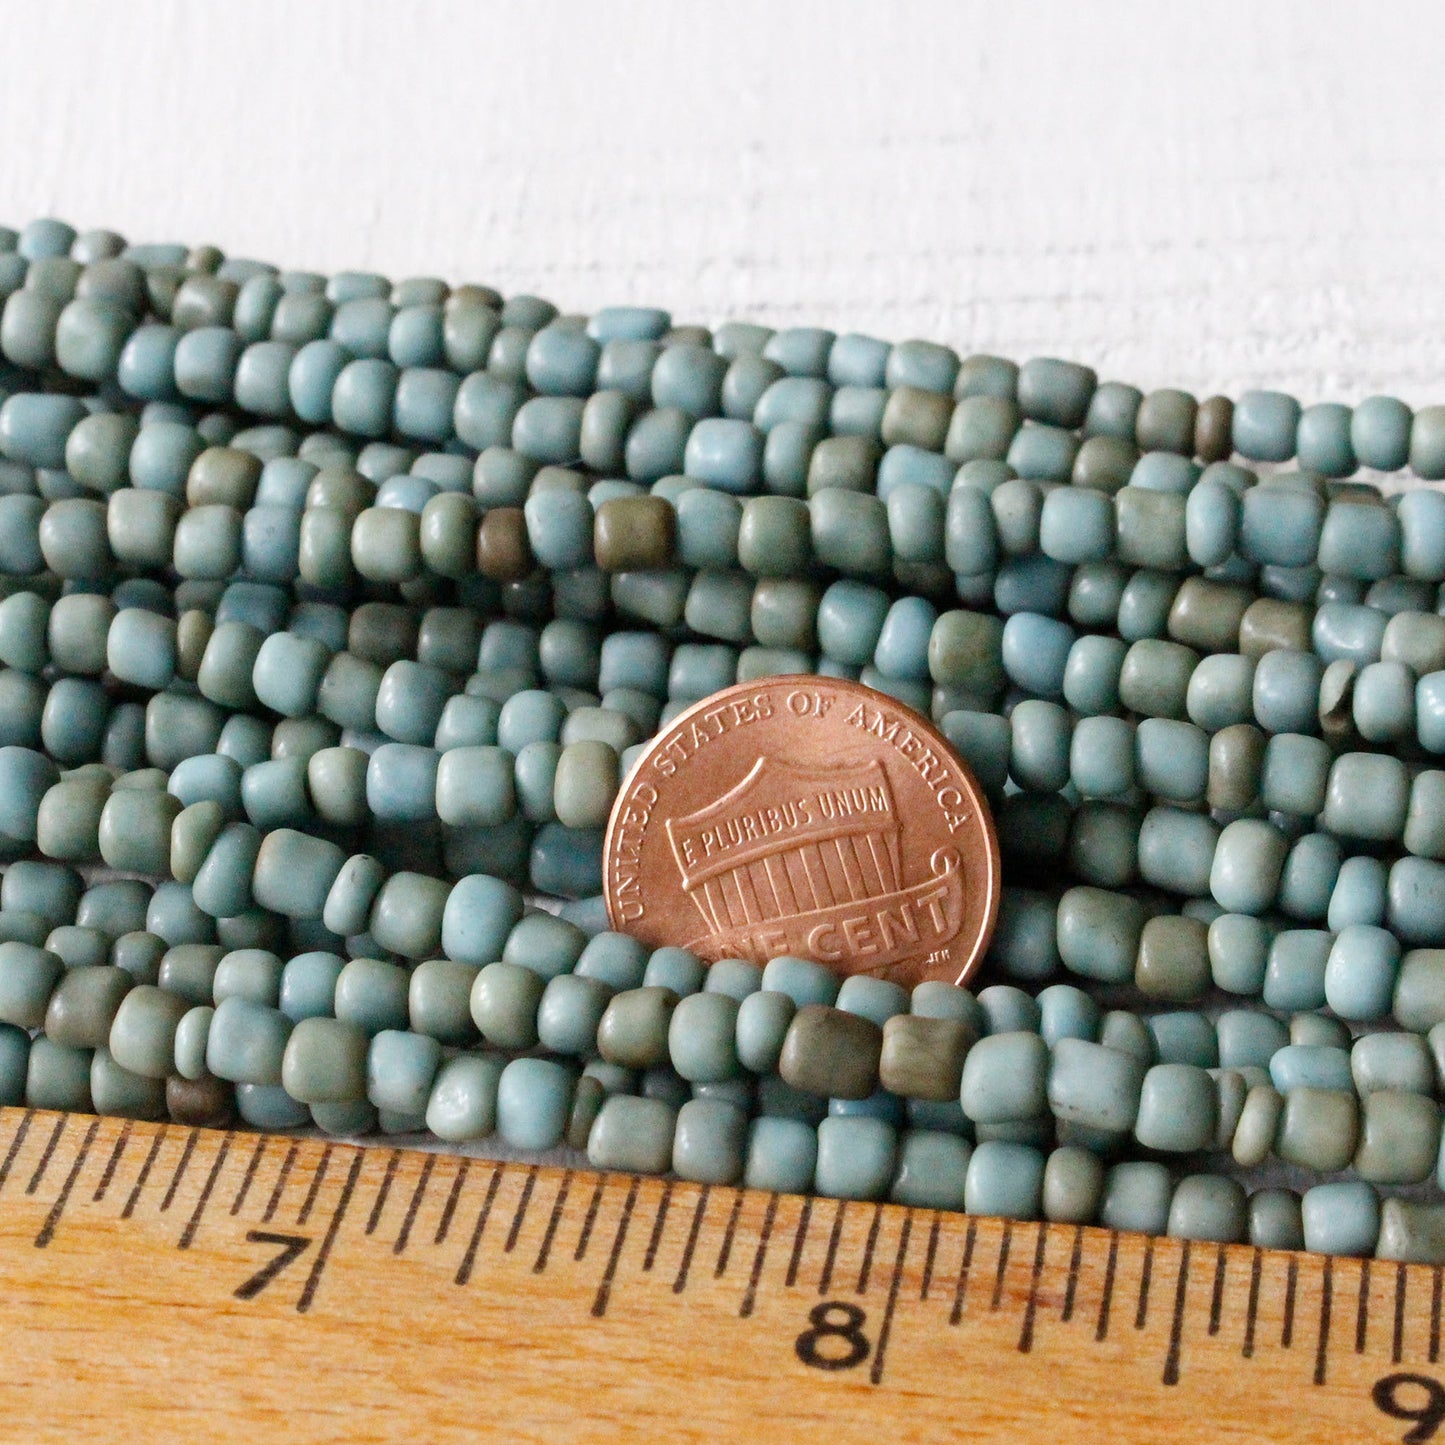 Rustic Indonesian Seed Beads - Dark Green Matte - 42 inches